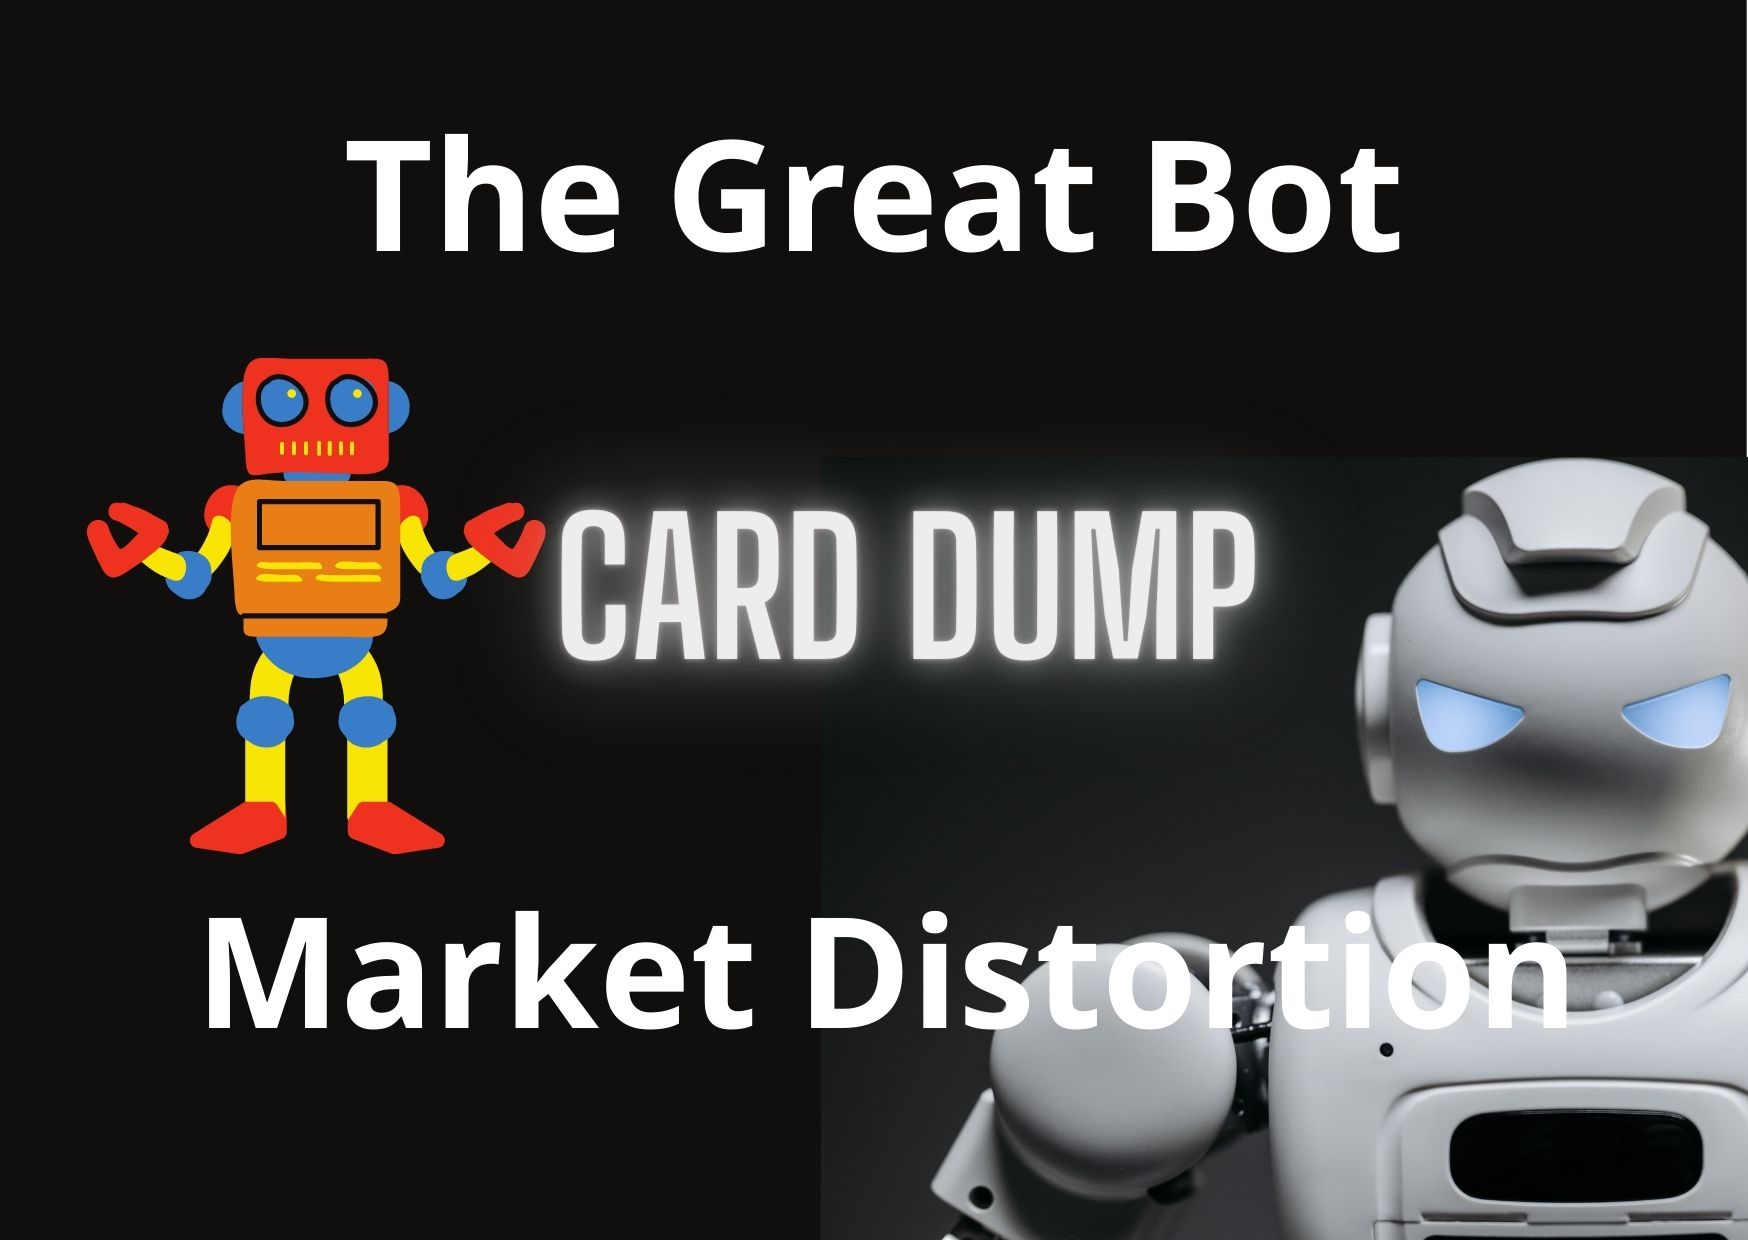 @imno/bot-farm-card-dumping-doesn-t-scale